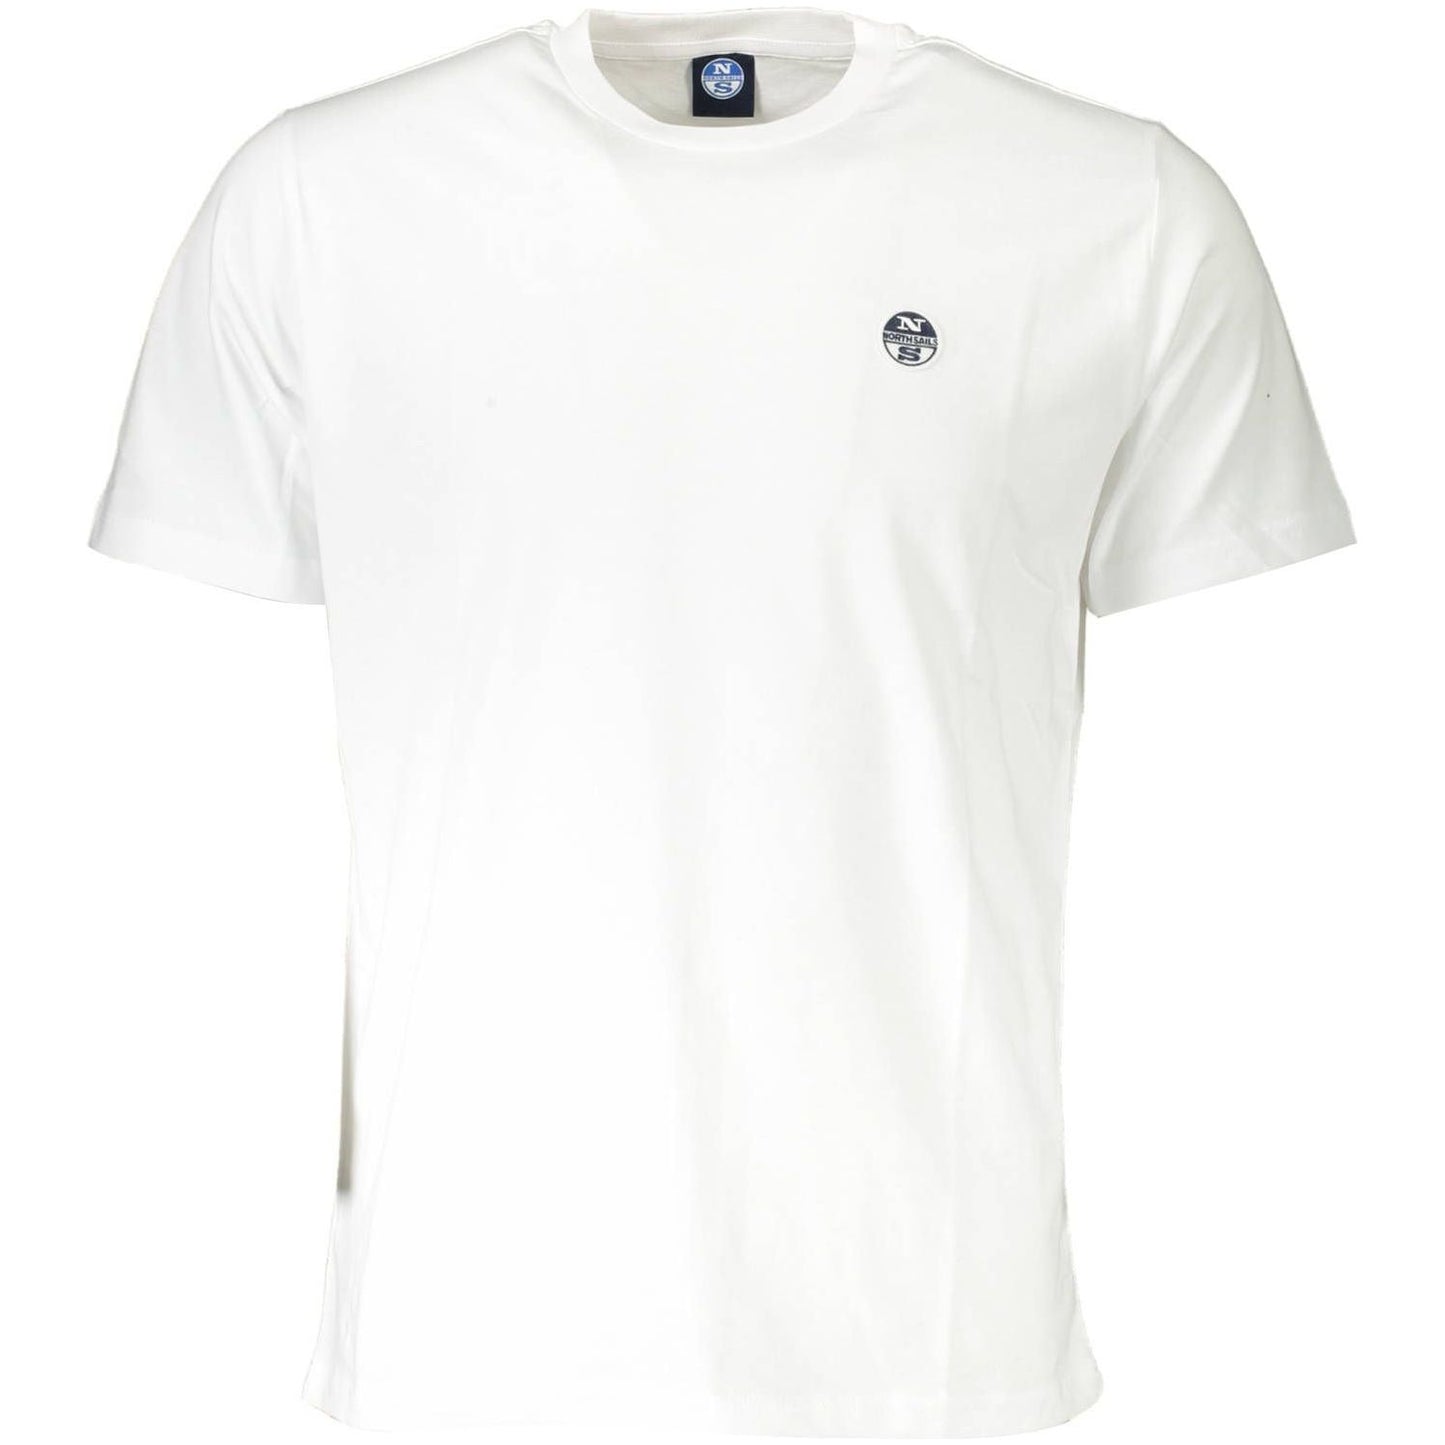 North Sails Chic White Cotton Tee with Logo Accent chic-white-cotton-tee-with-logo-accent